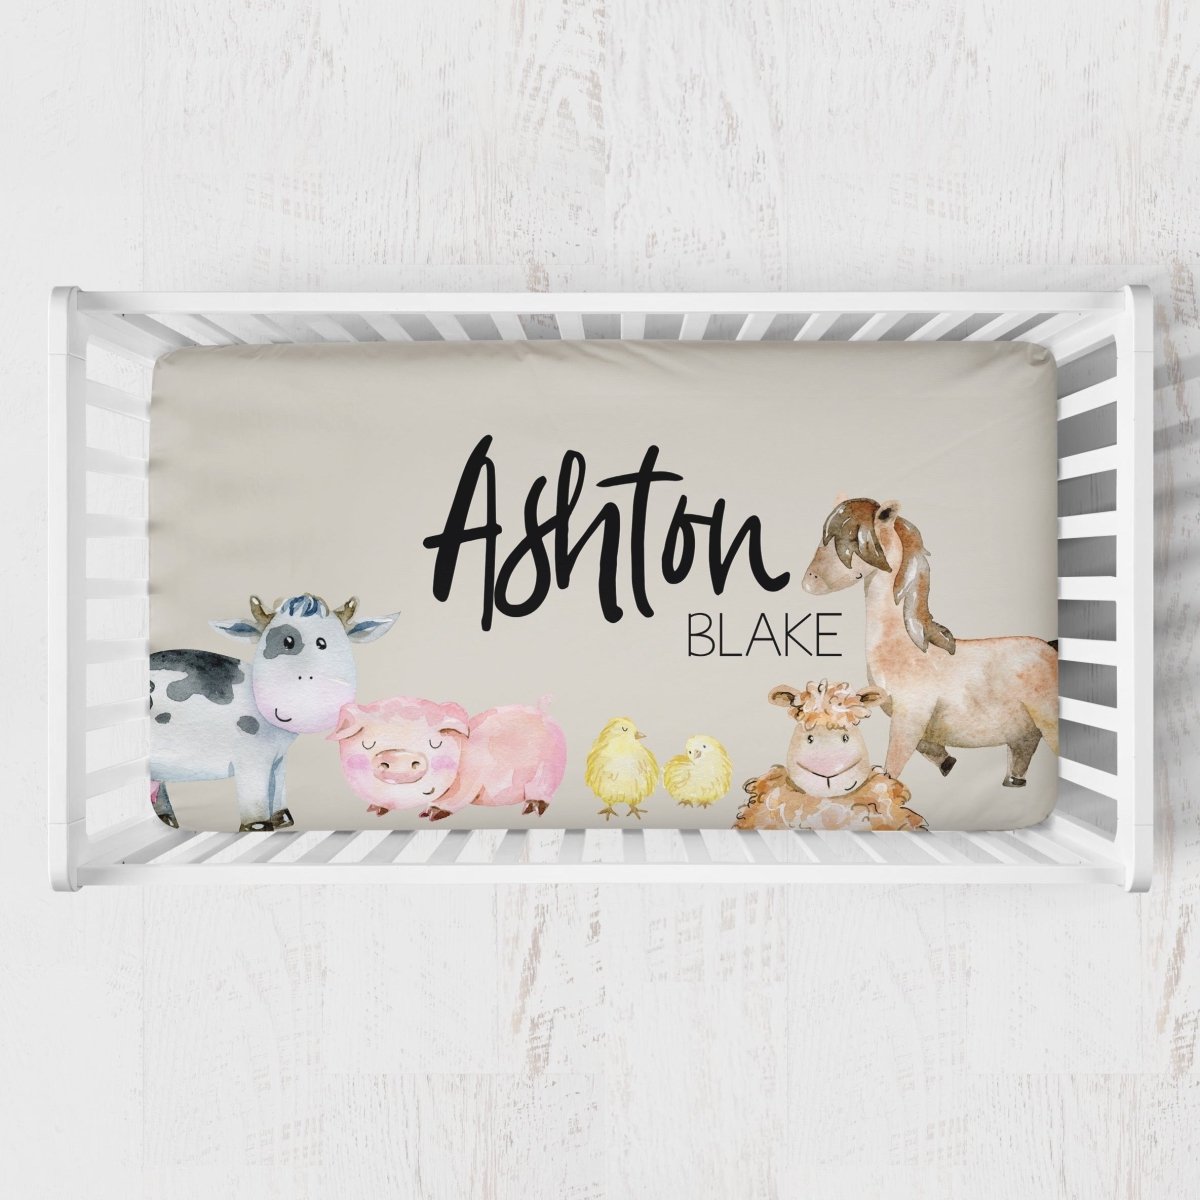 On the Farm Animals Personalized Crib Sheet - gender_boy, gender_neutral, Personalized_Yes